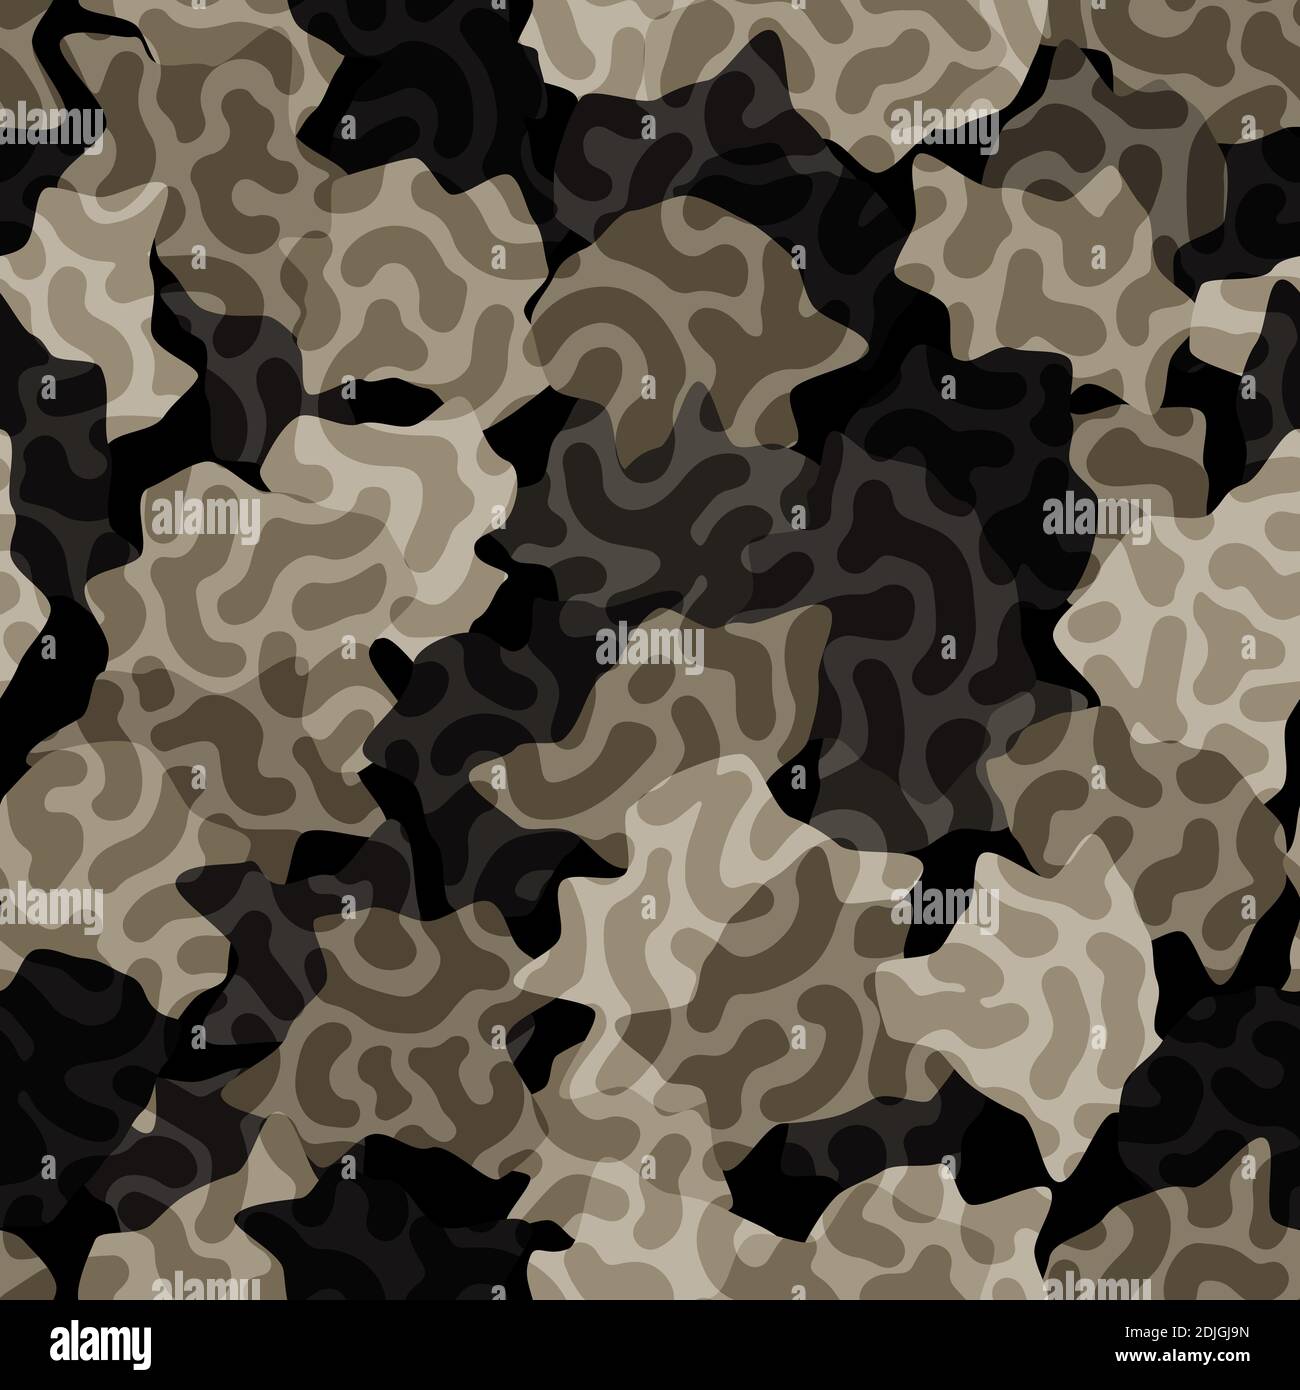 Digital camouflage seamless pattern. Abstract army or hunting masking ornament Stock Vector